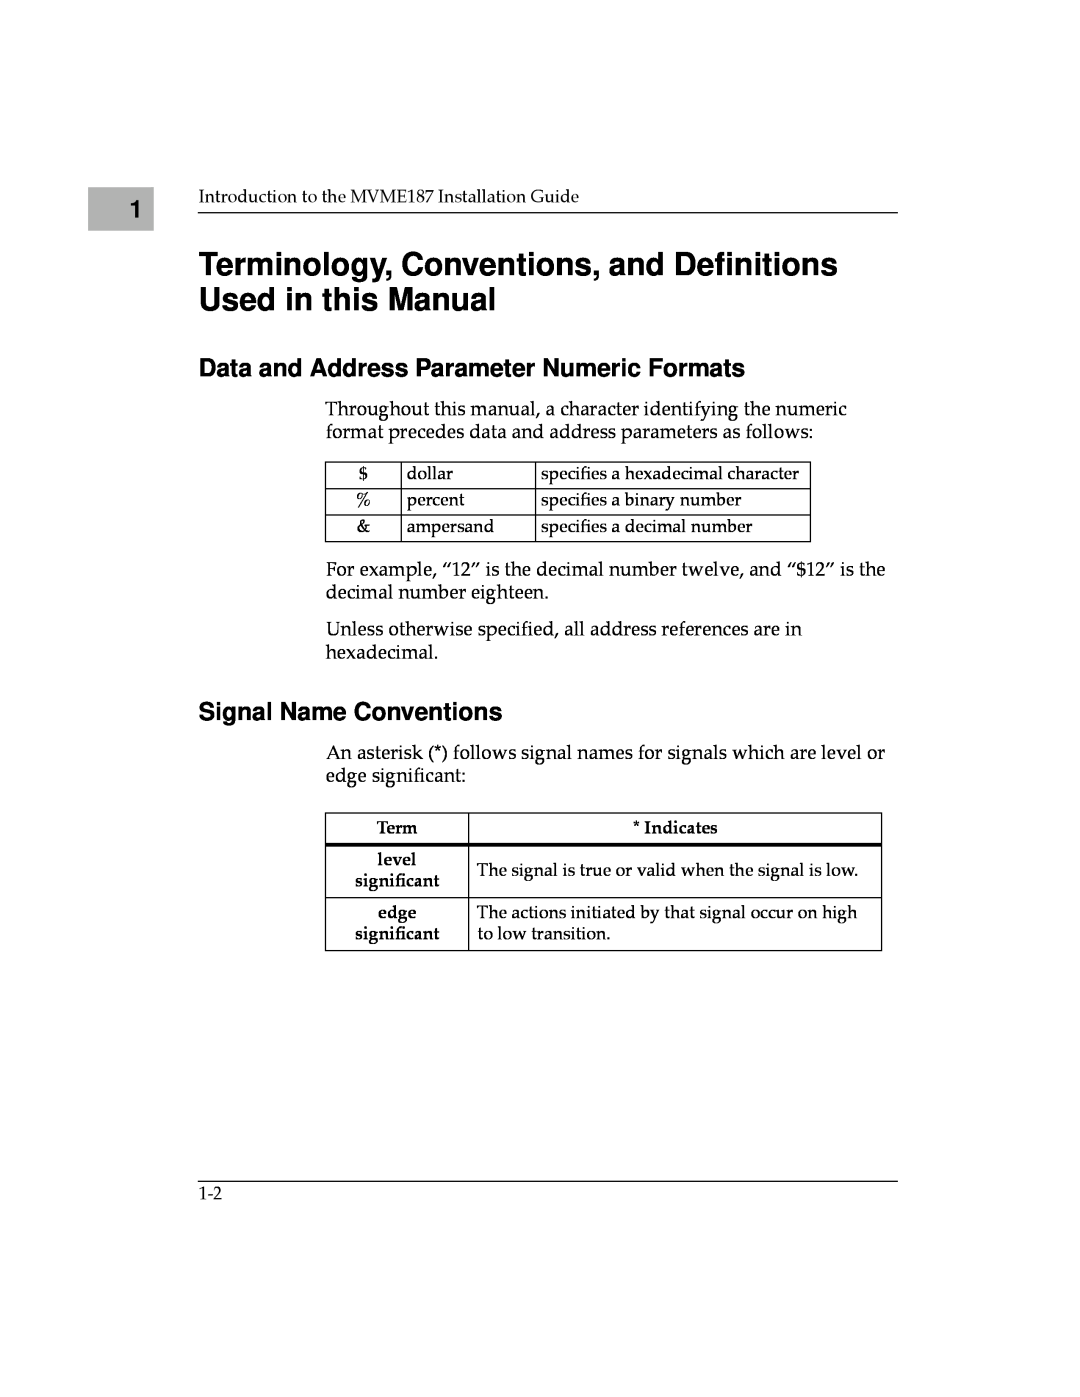 Motorola MVME187 Terminology, Conventions, and Deﬁnitions Used in this Manual, Data and Address Parameter Numeric Formats 